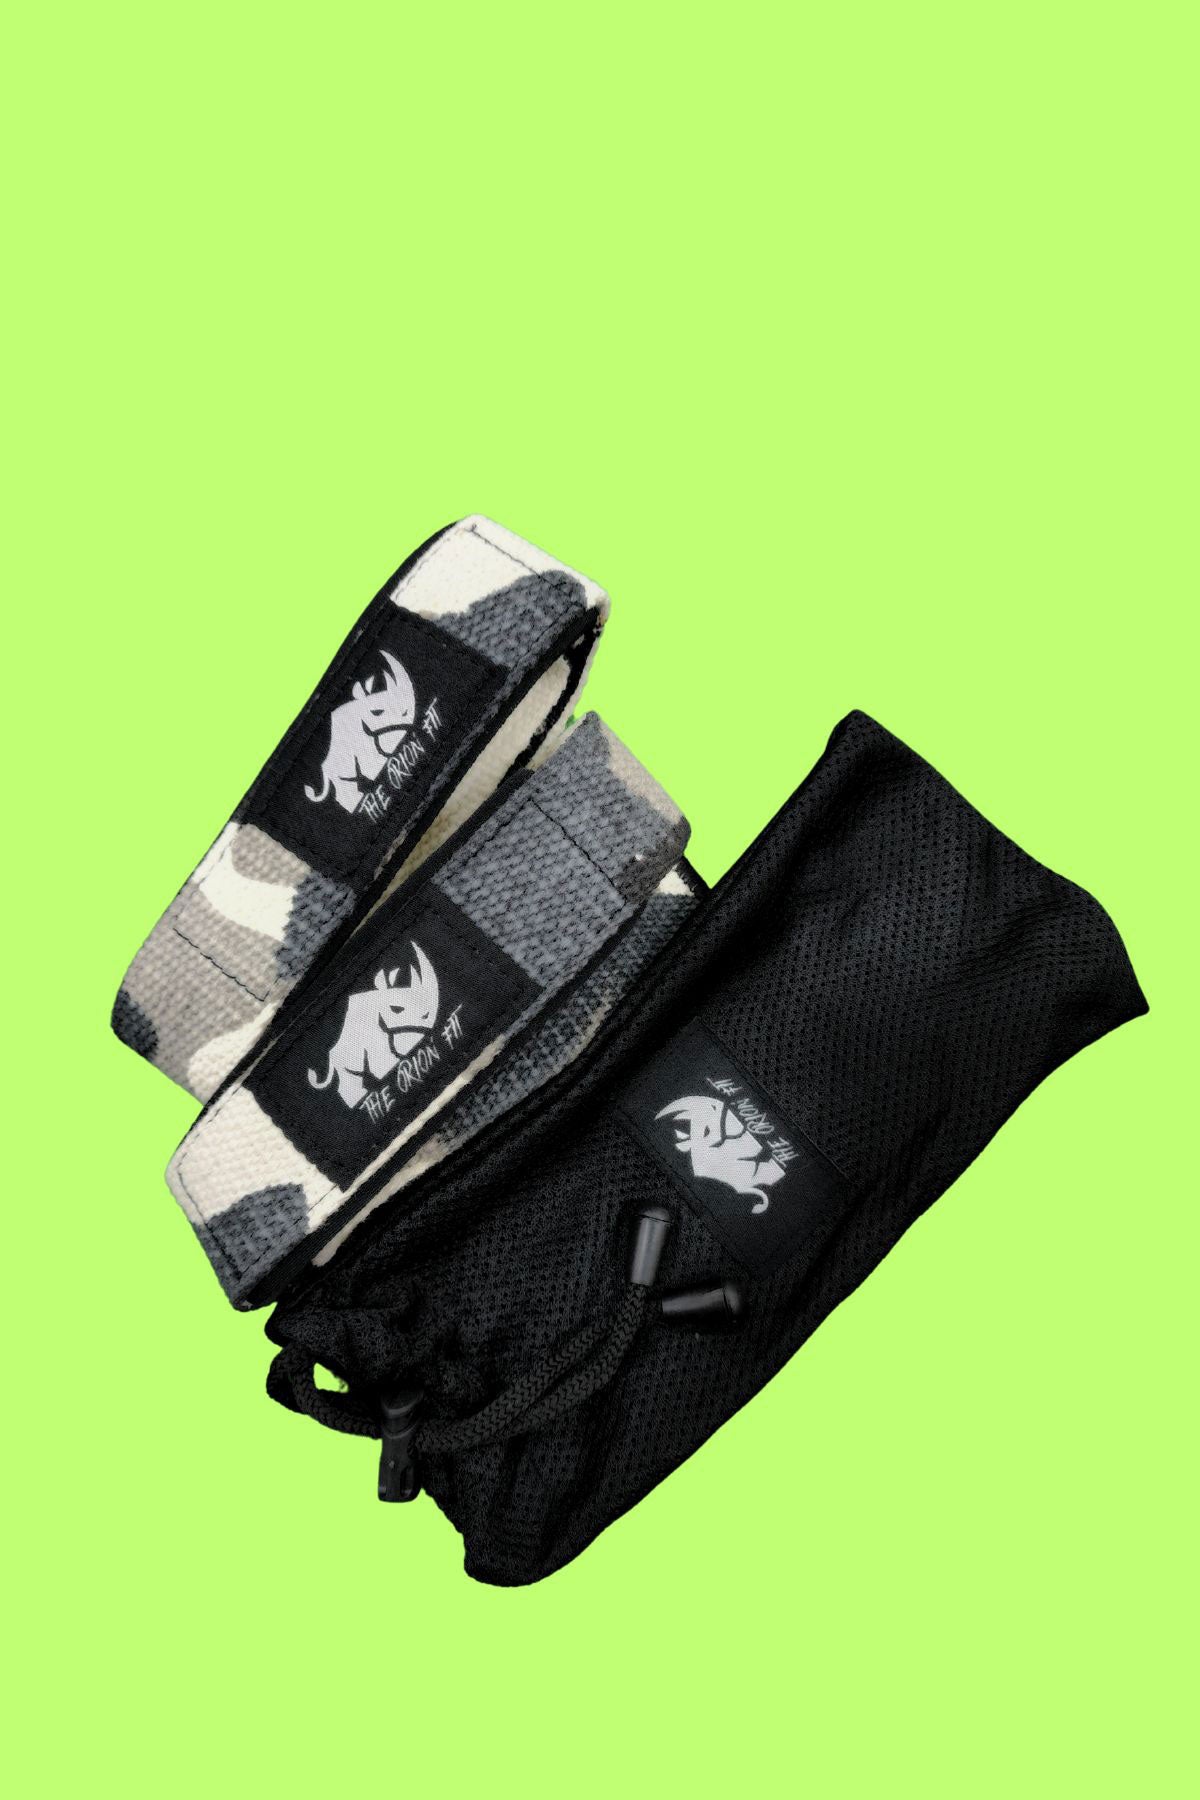 AMPLIFY DEAD LIFT EXTRA COMFORT STRAPS- CAMO SILVER - The Orion Fit